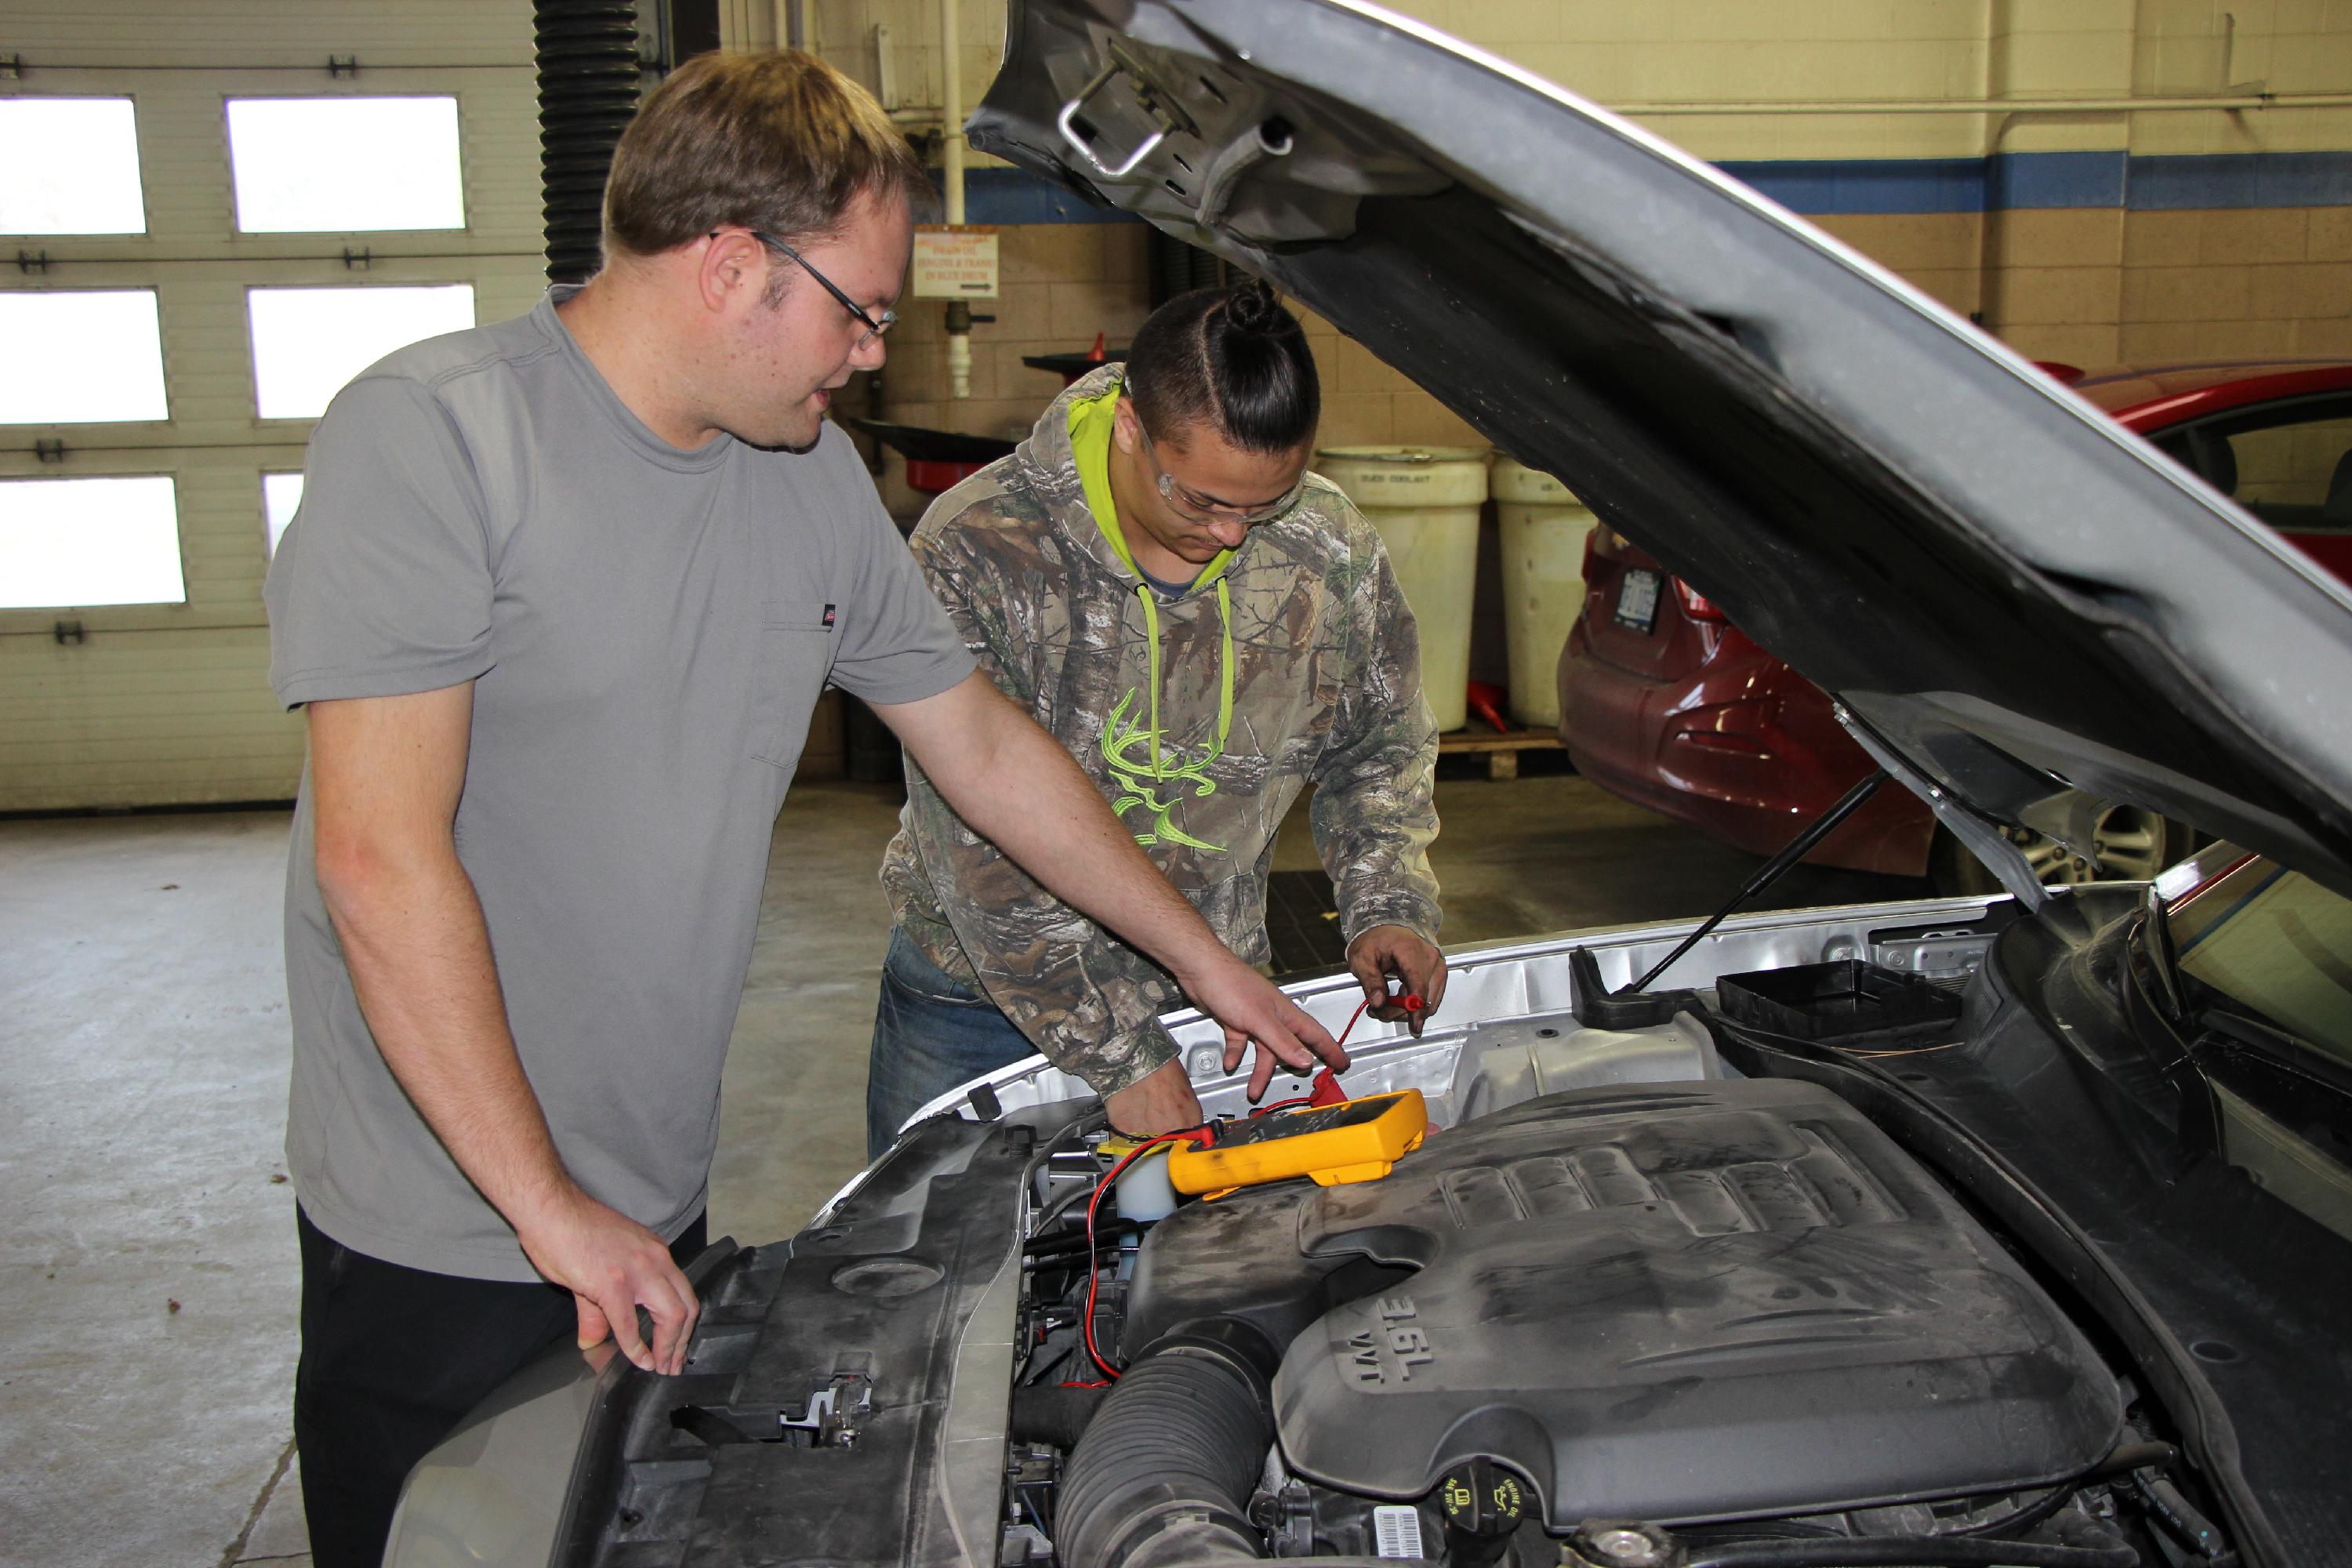 Auto Service instructor works under the hood of a car with a student